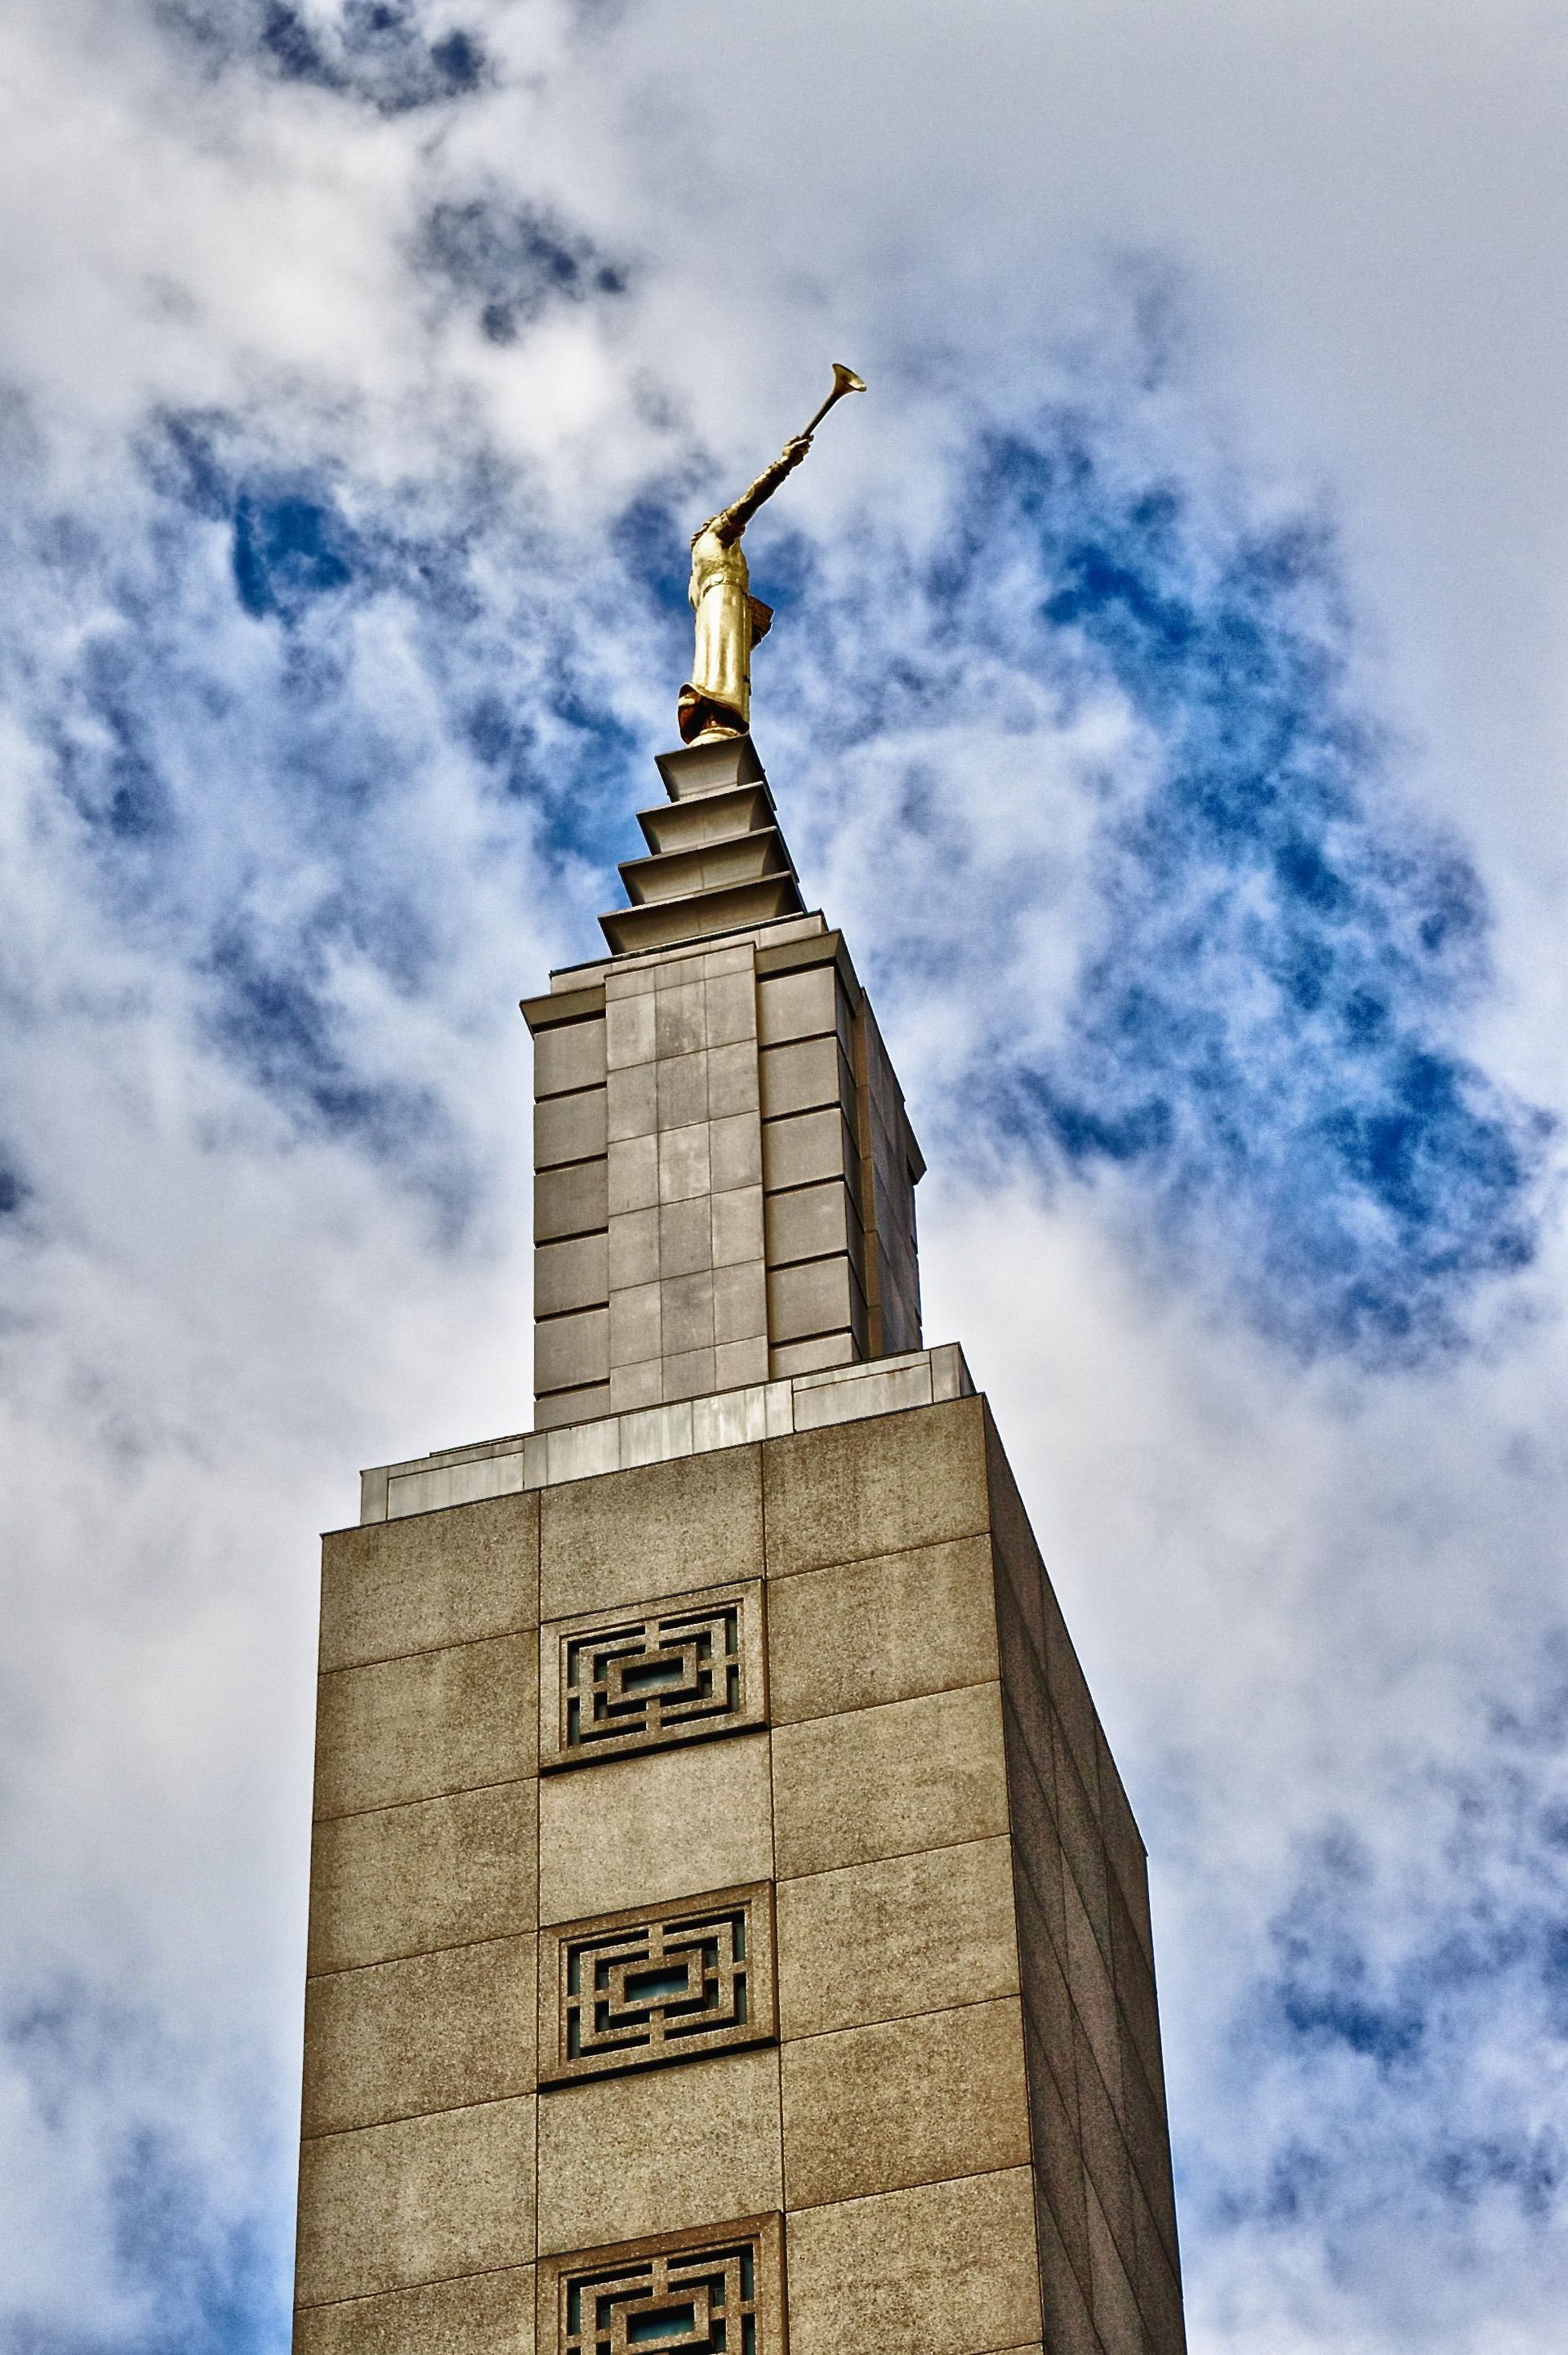 The Los Angeles California Temple spire, including the angel Moroni and the exterior of the temple.